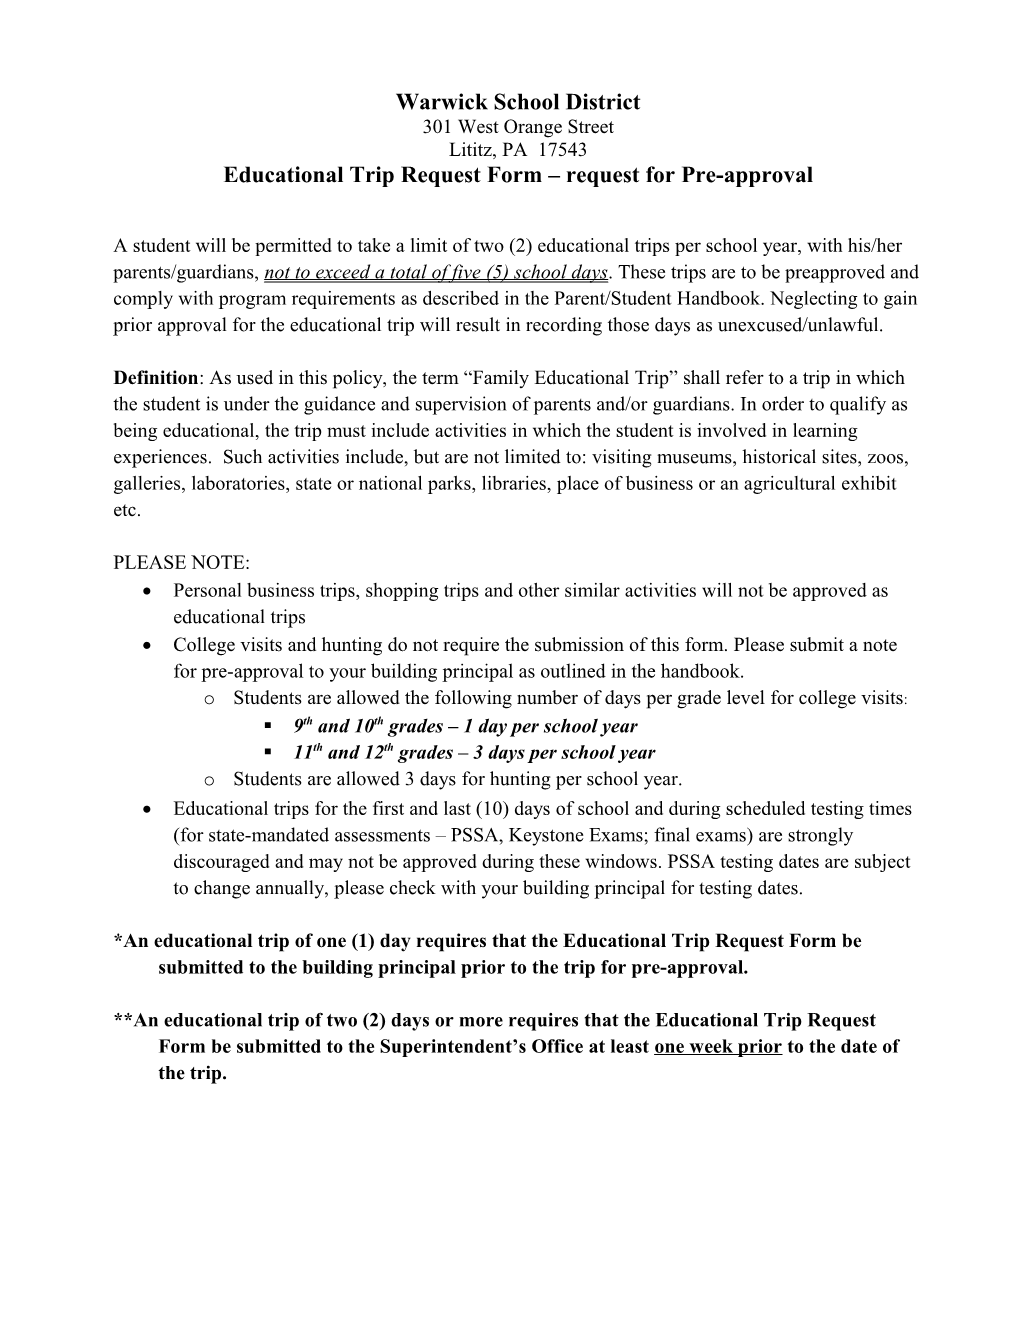 Educational Trip Request Form Request for Pre-Approval